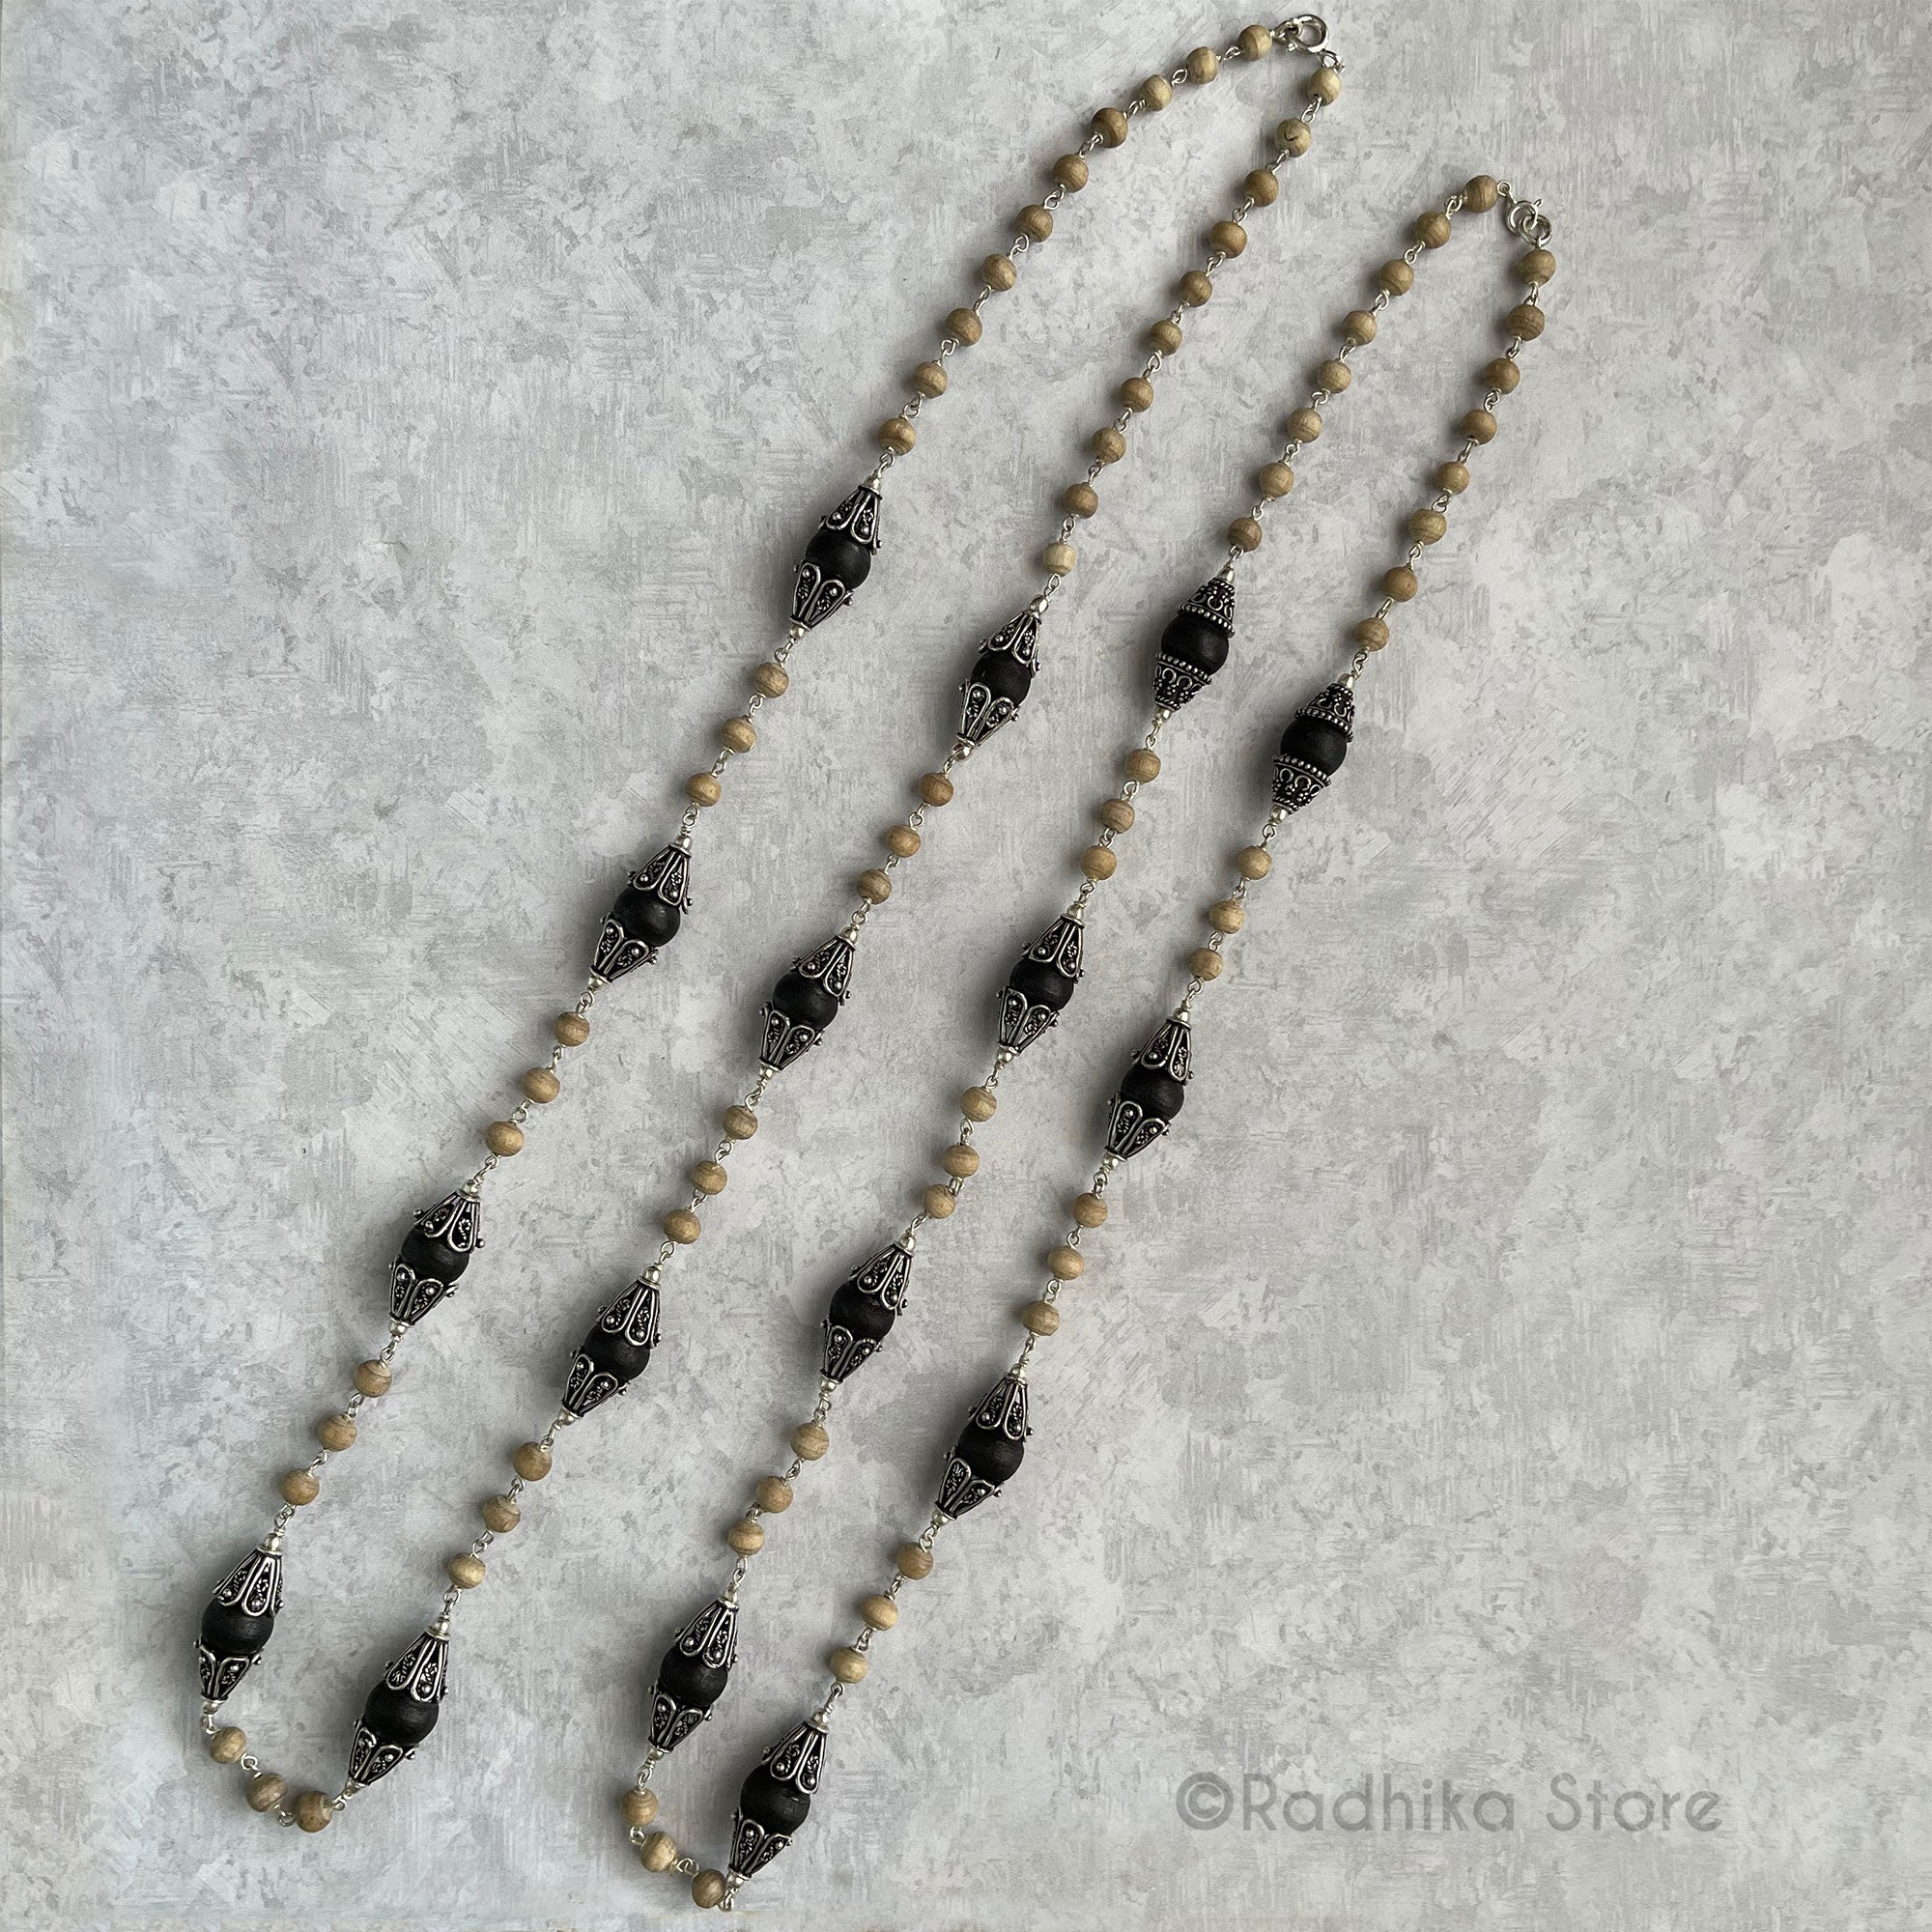 Exclusive Design -  Black and Natural -  Fancy Long End Cap- Tulsi Silver Necklace- Choose Size